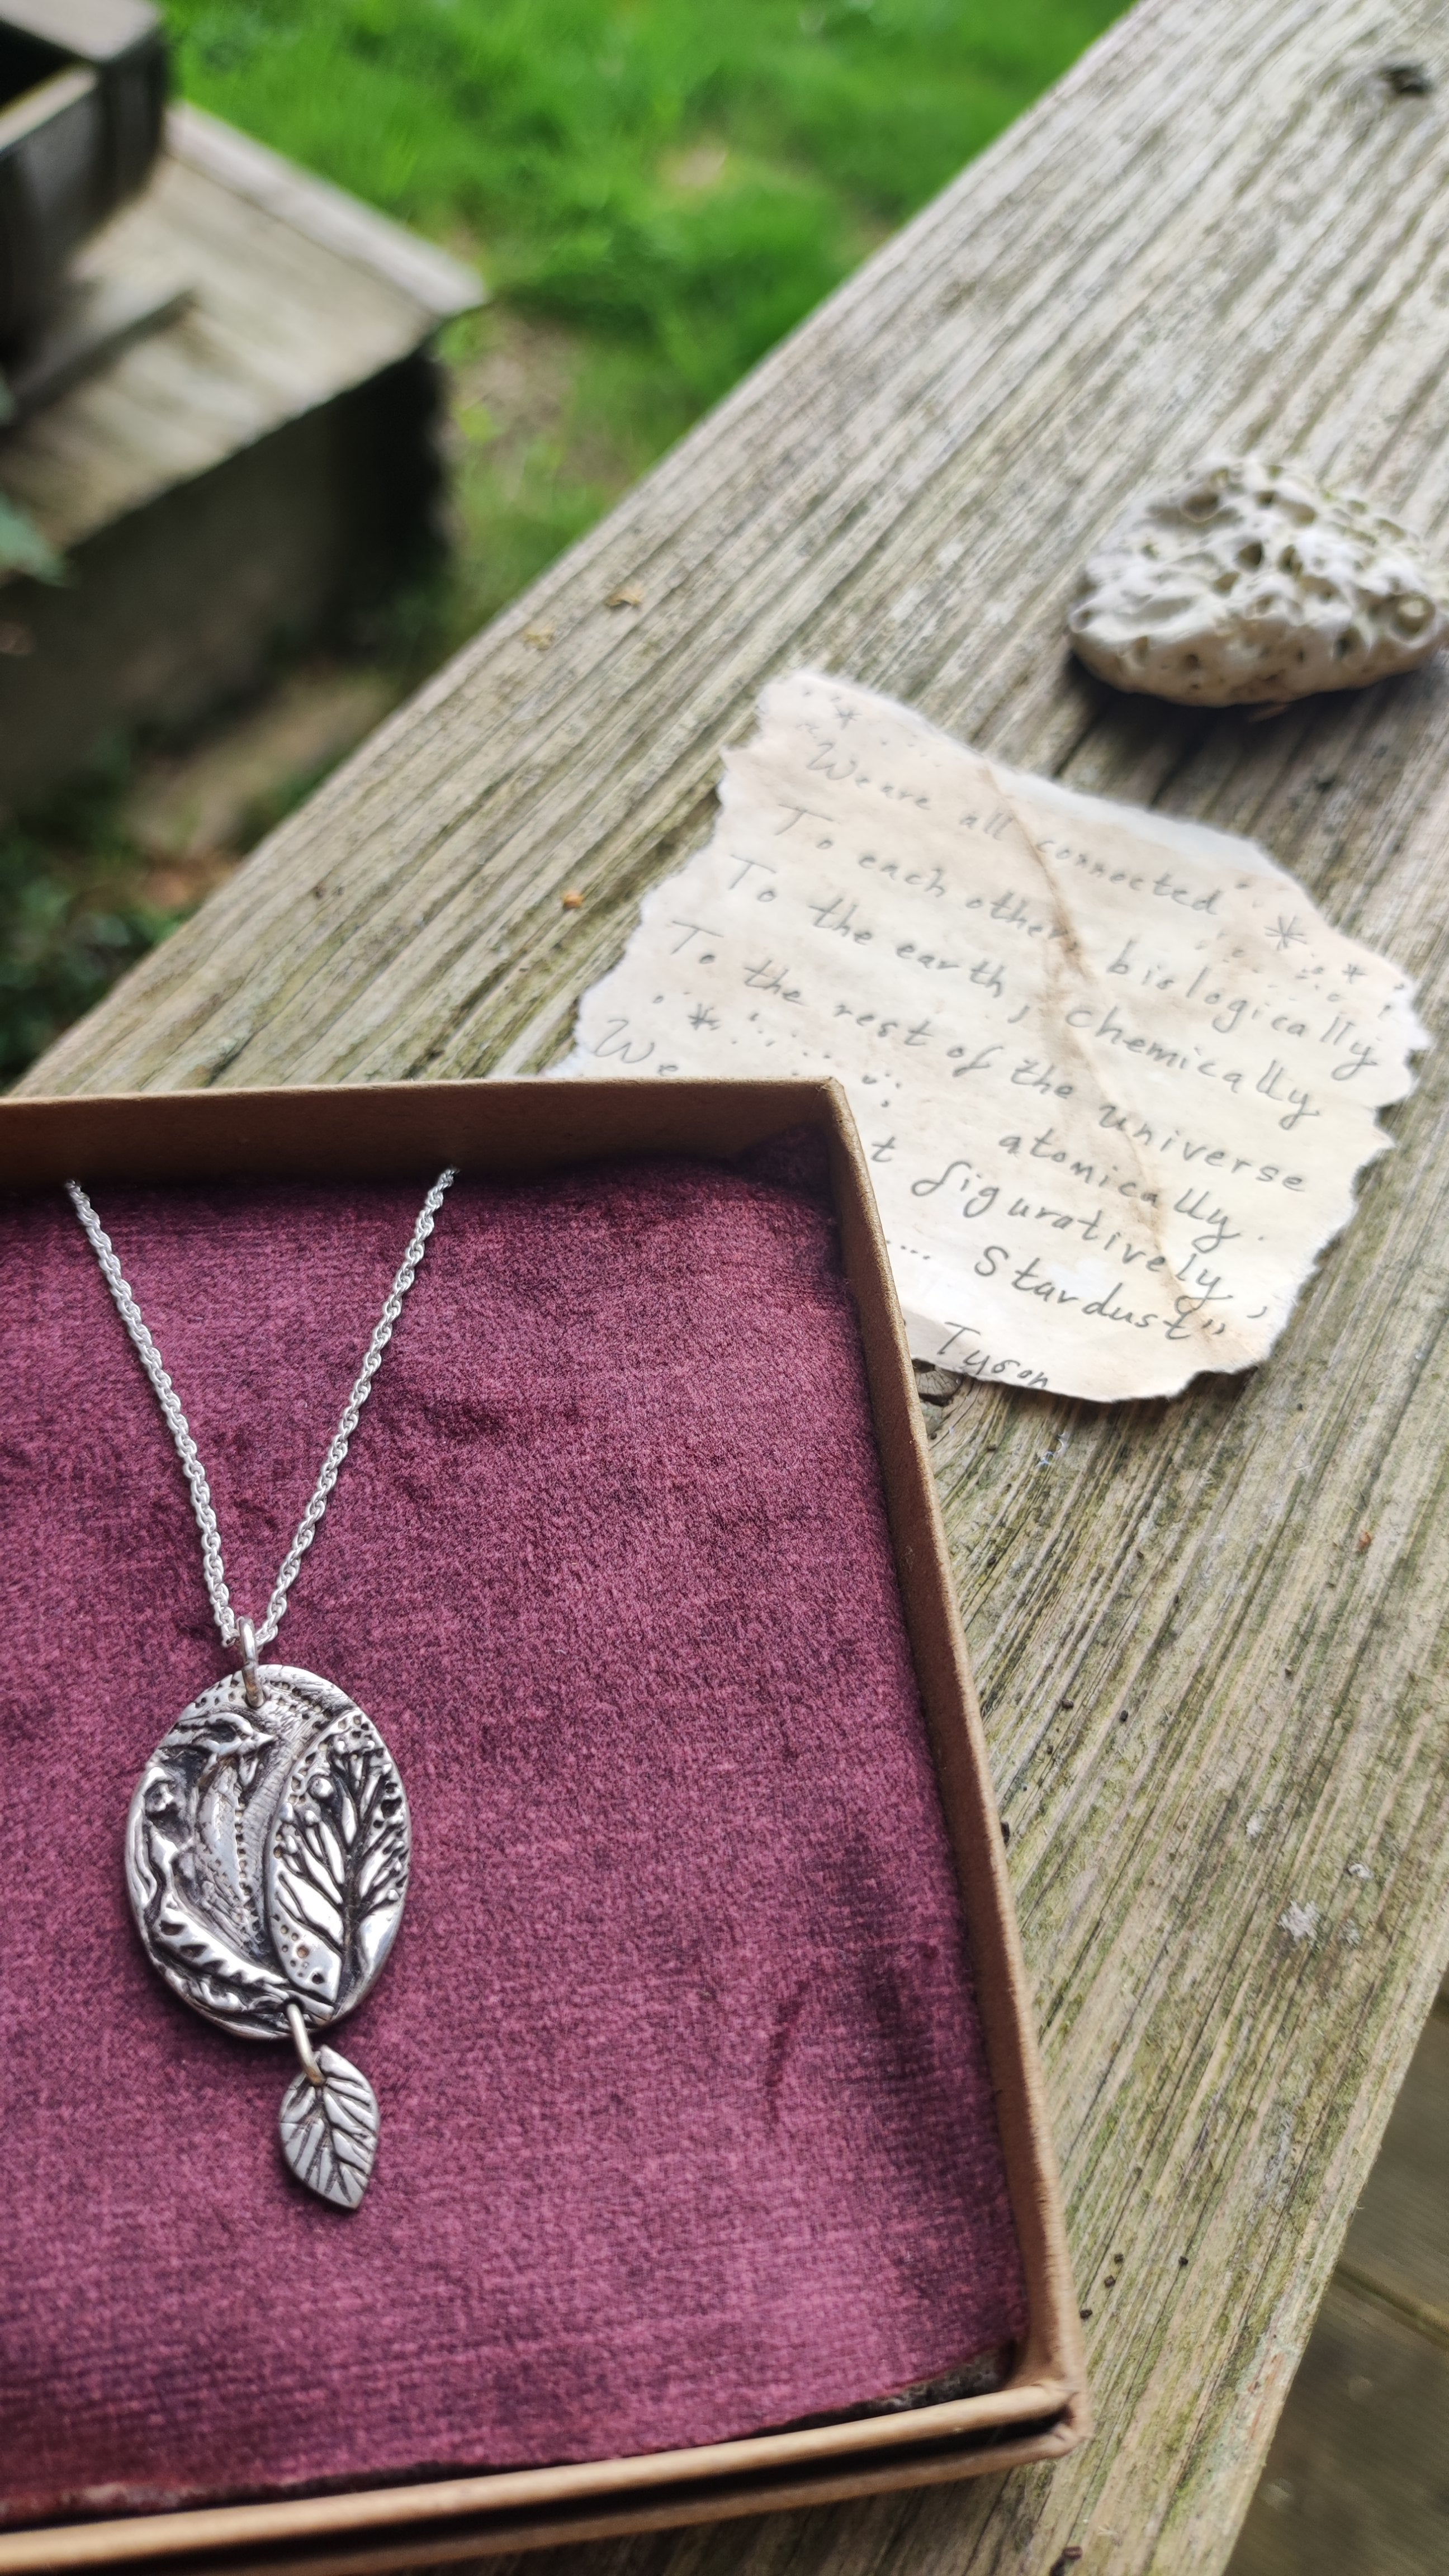 We are all Connected ~ Silver pendant